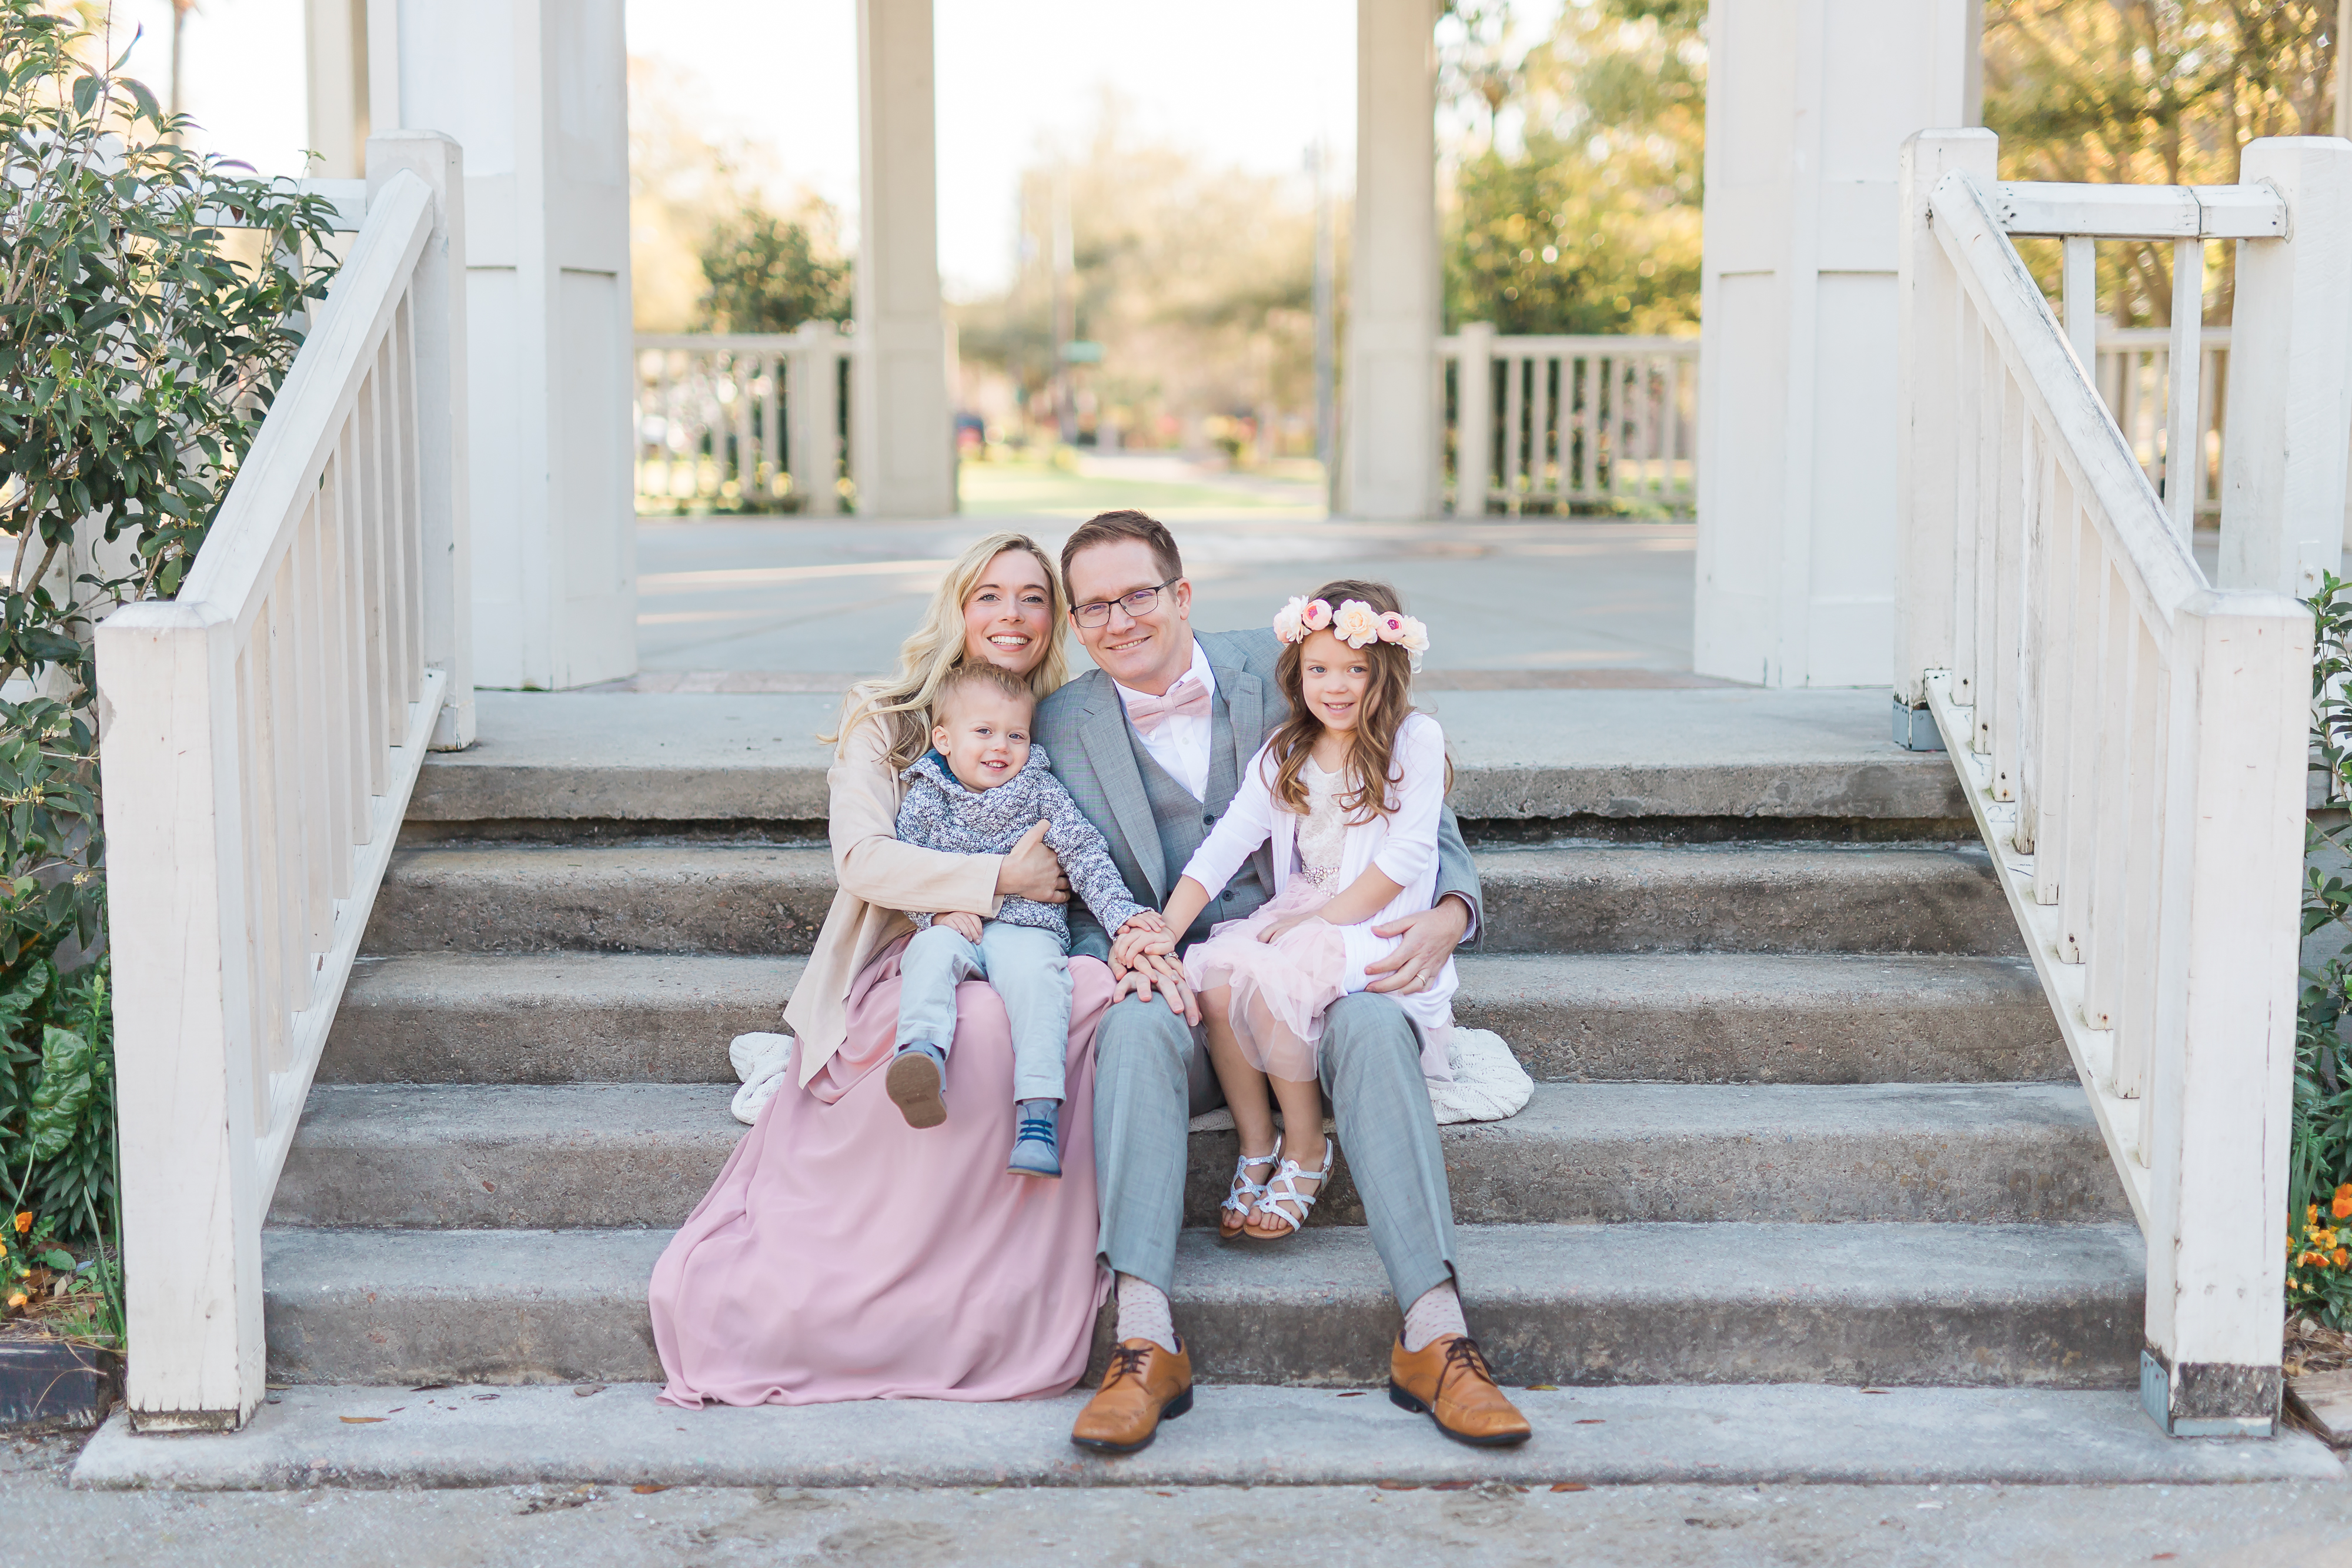 Couple family photos done with me at Hampton Park, a beautiful public park, one of Charleston’s biggest and most colorful parks by Janice Jones Photography.